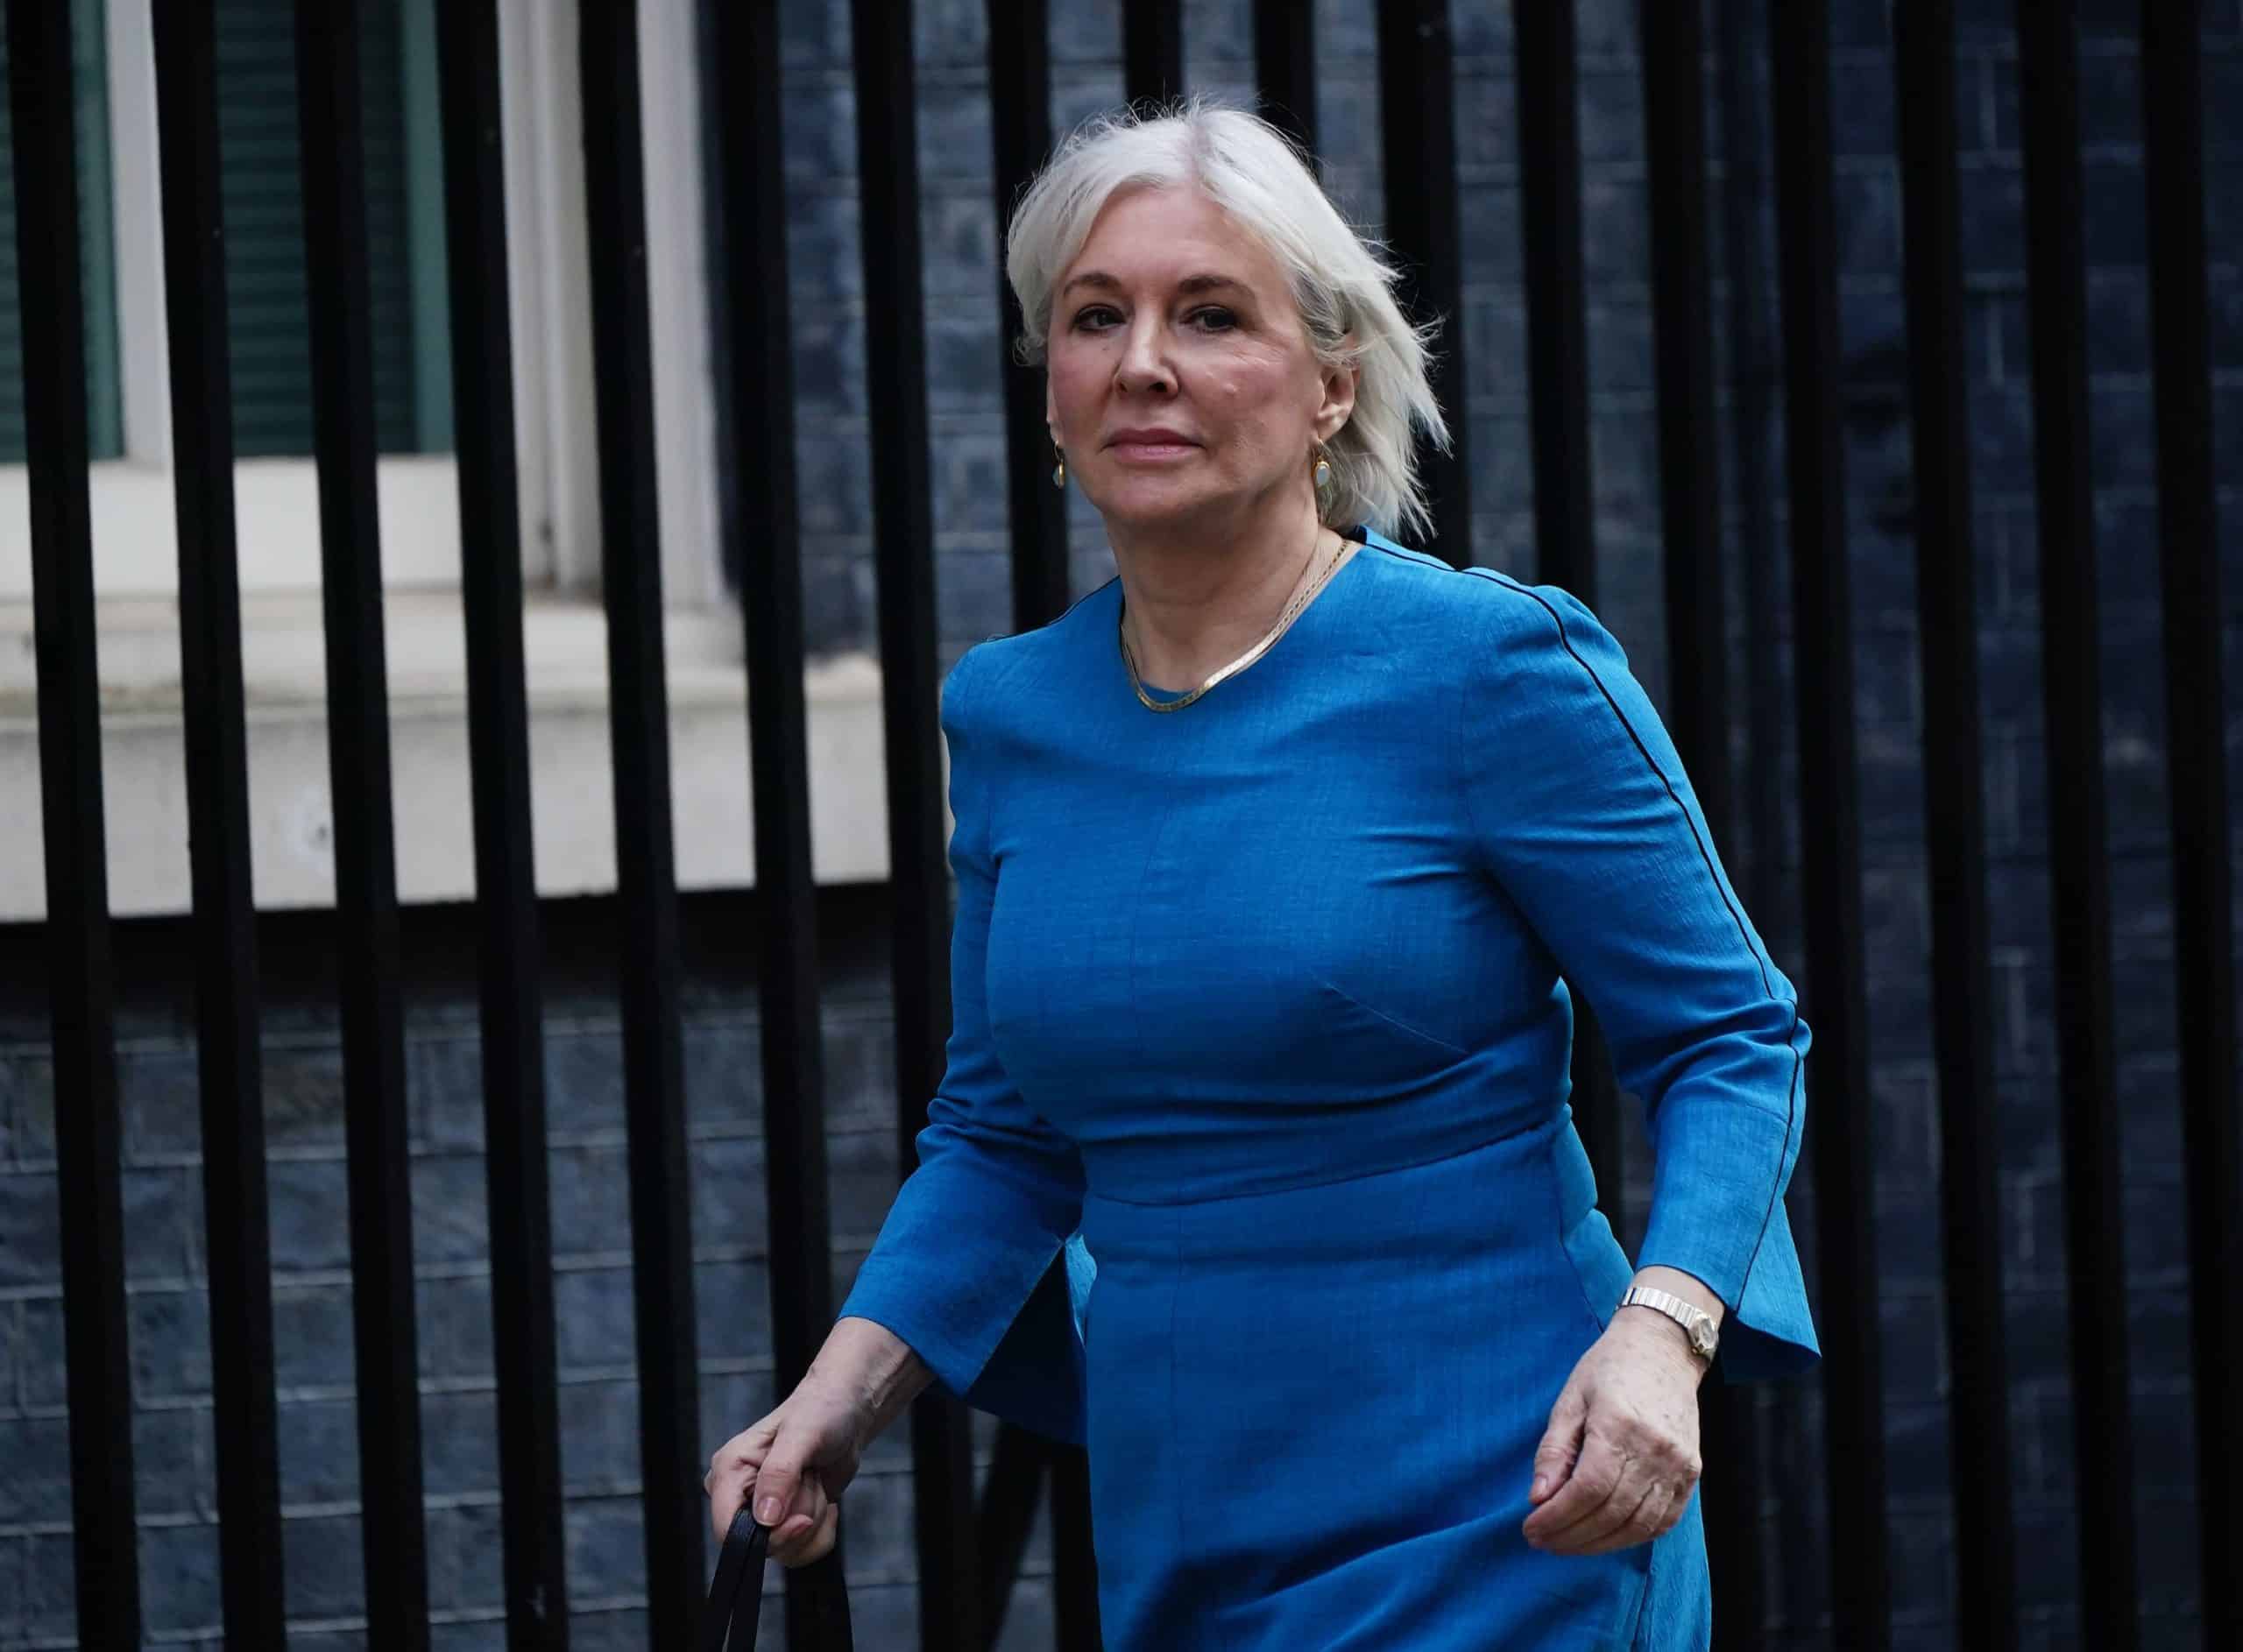 Dorries could be forced out of parliament under new proposals